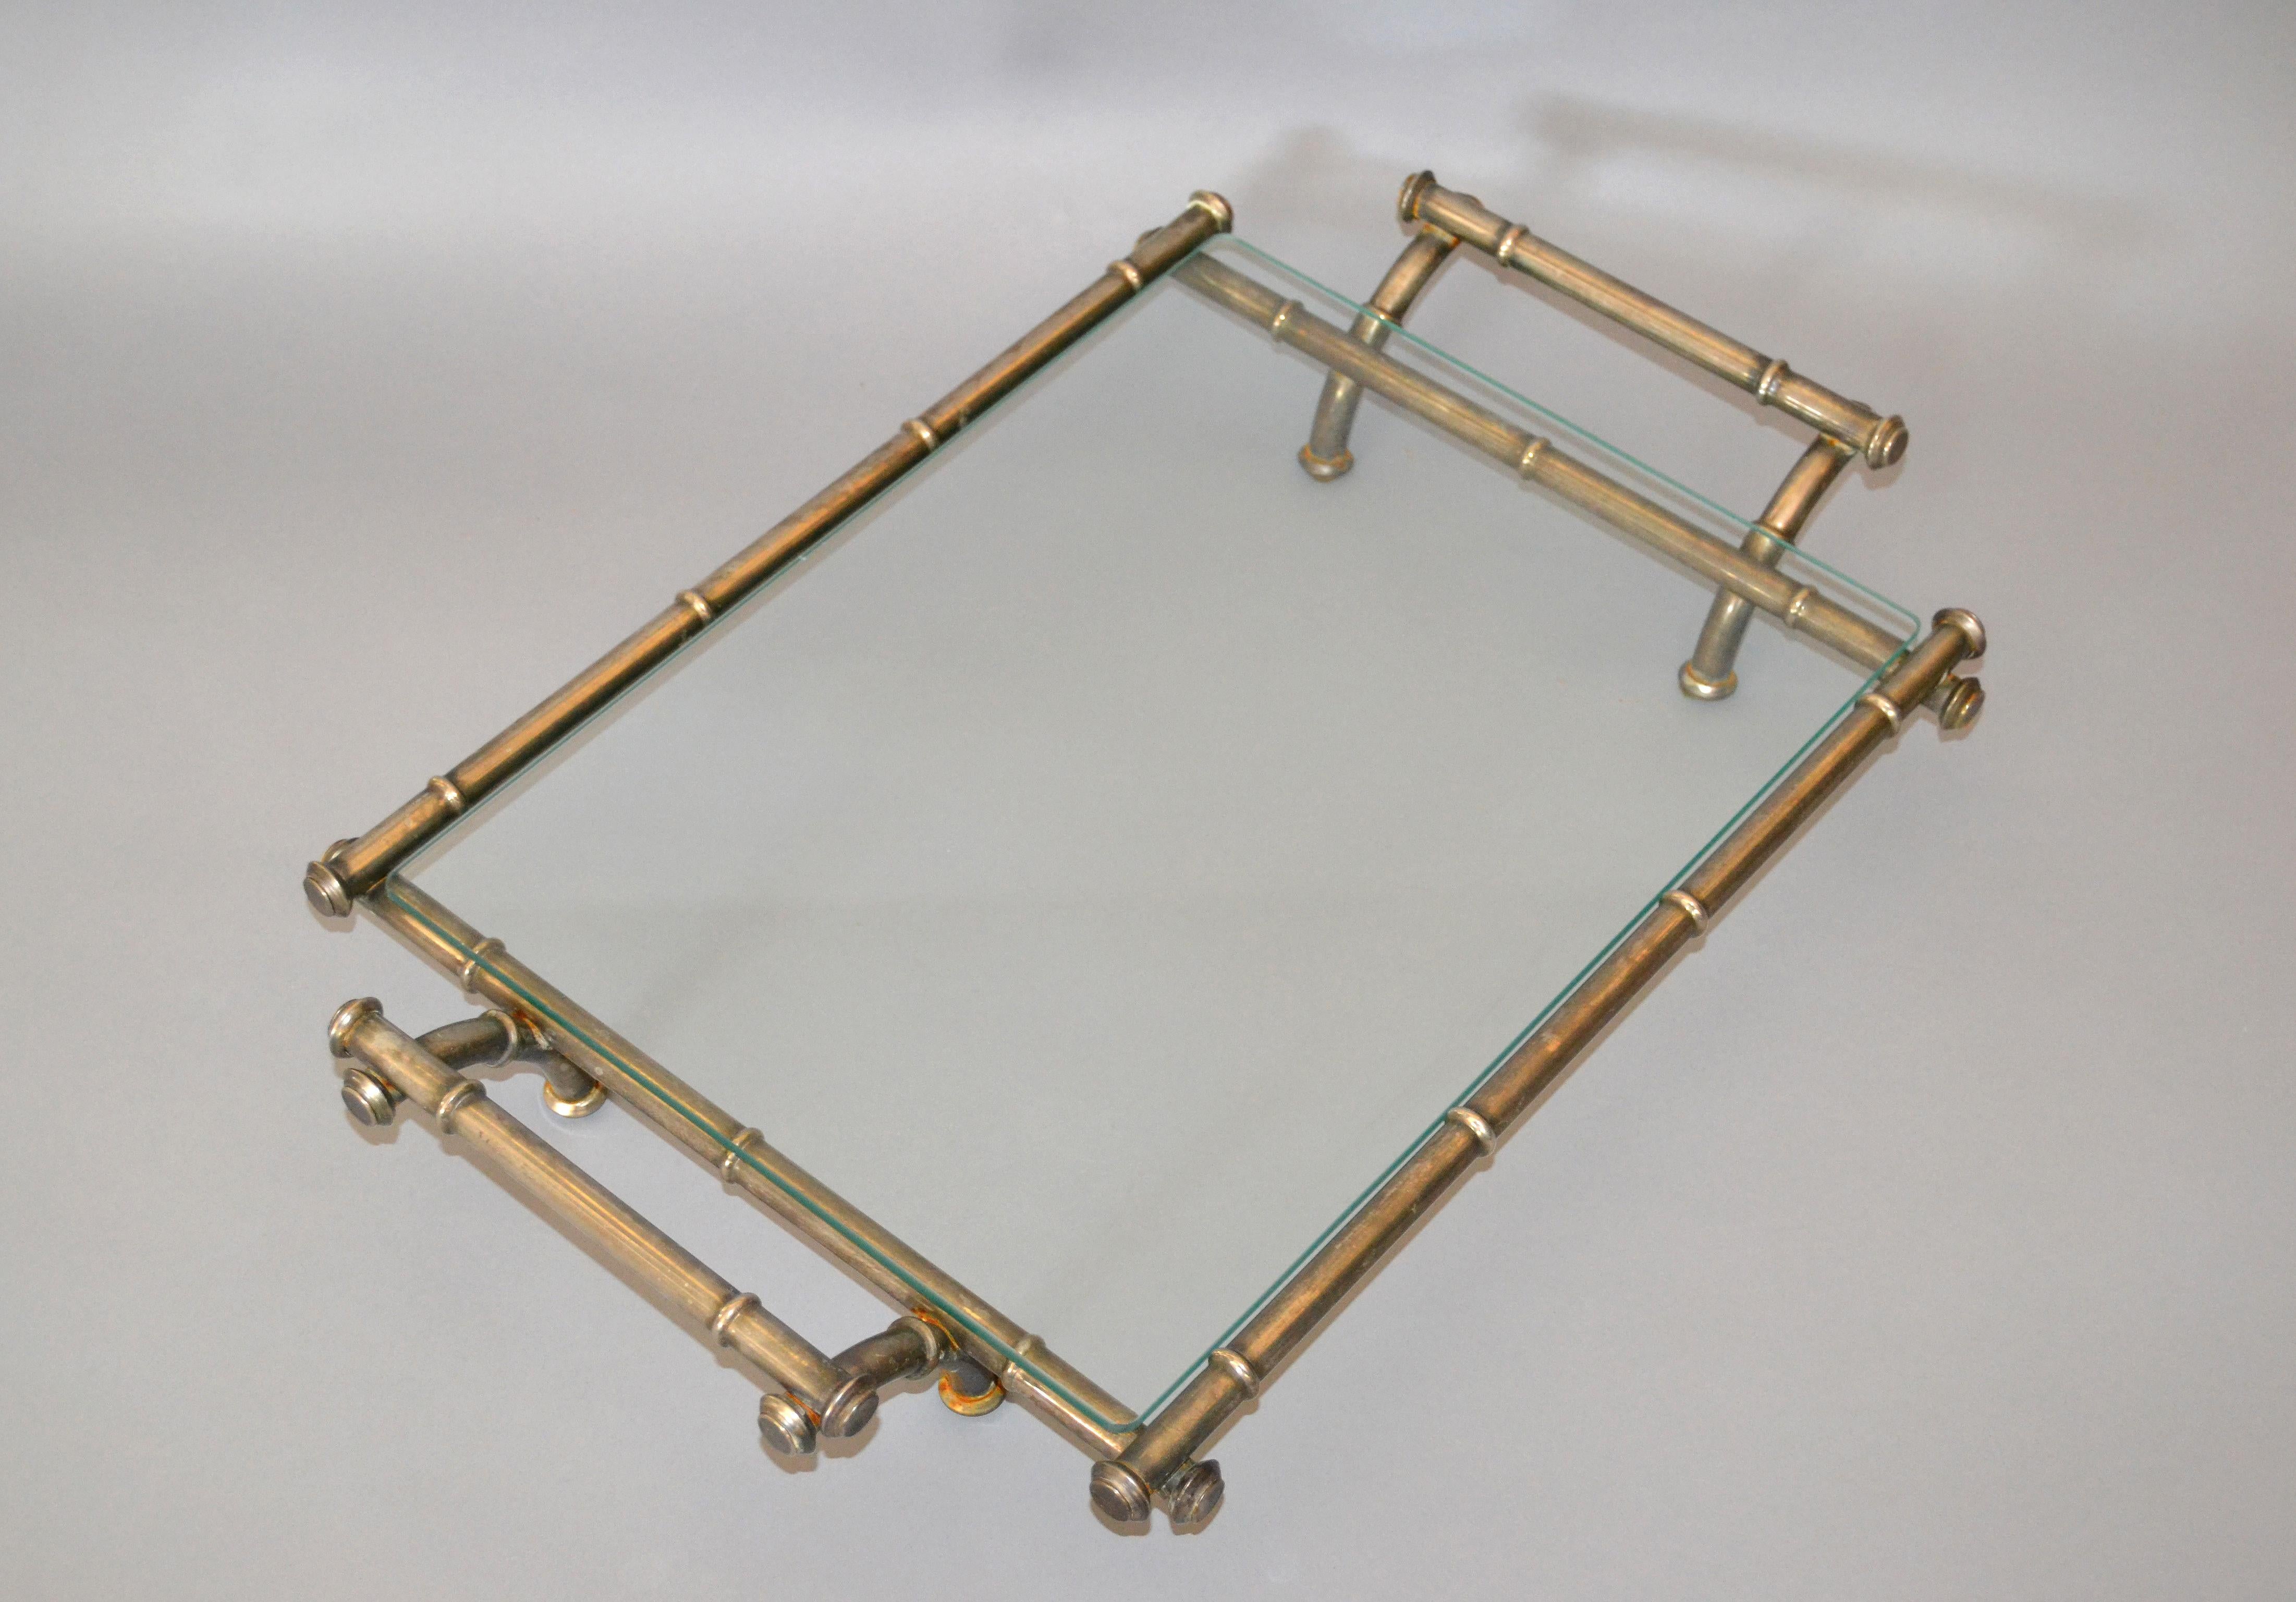 Hollywood Regency Faux Bamboo Metal and Glass Table Tray, Serving Tray, Platter 1